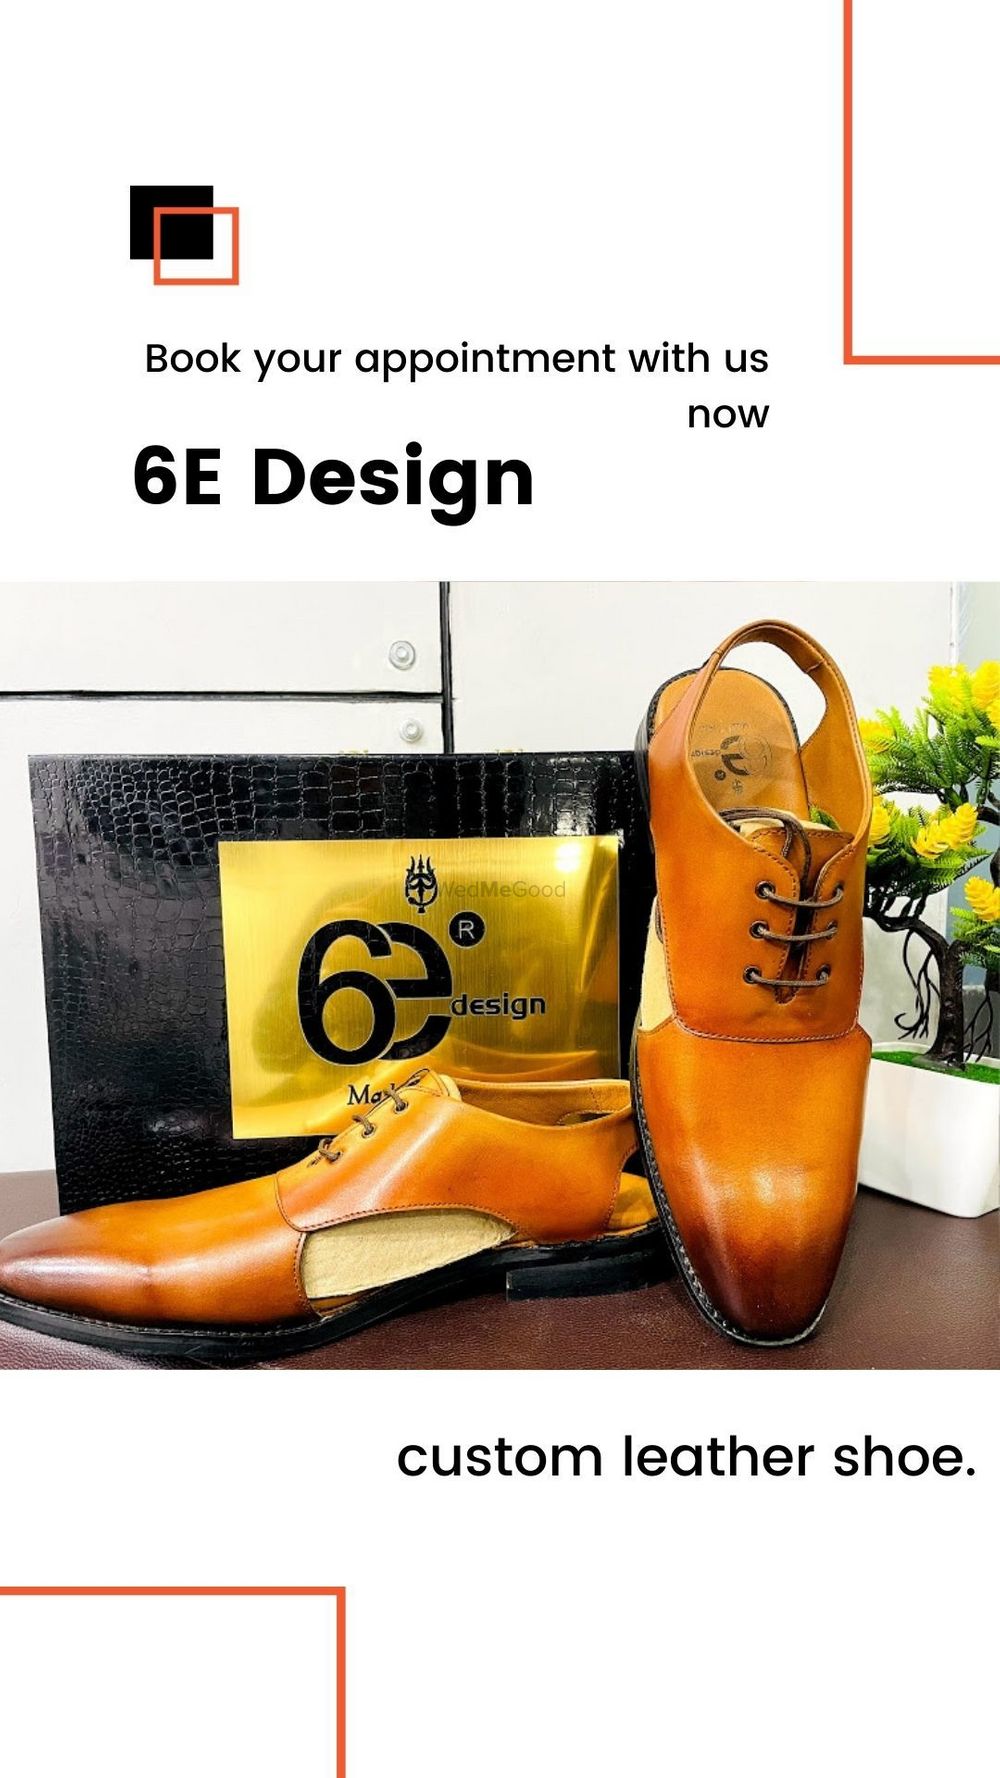 Photo From Shoe - By 6e Design